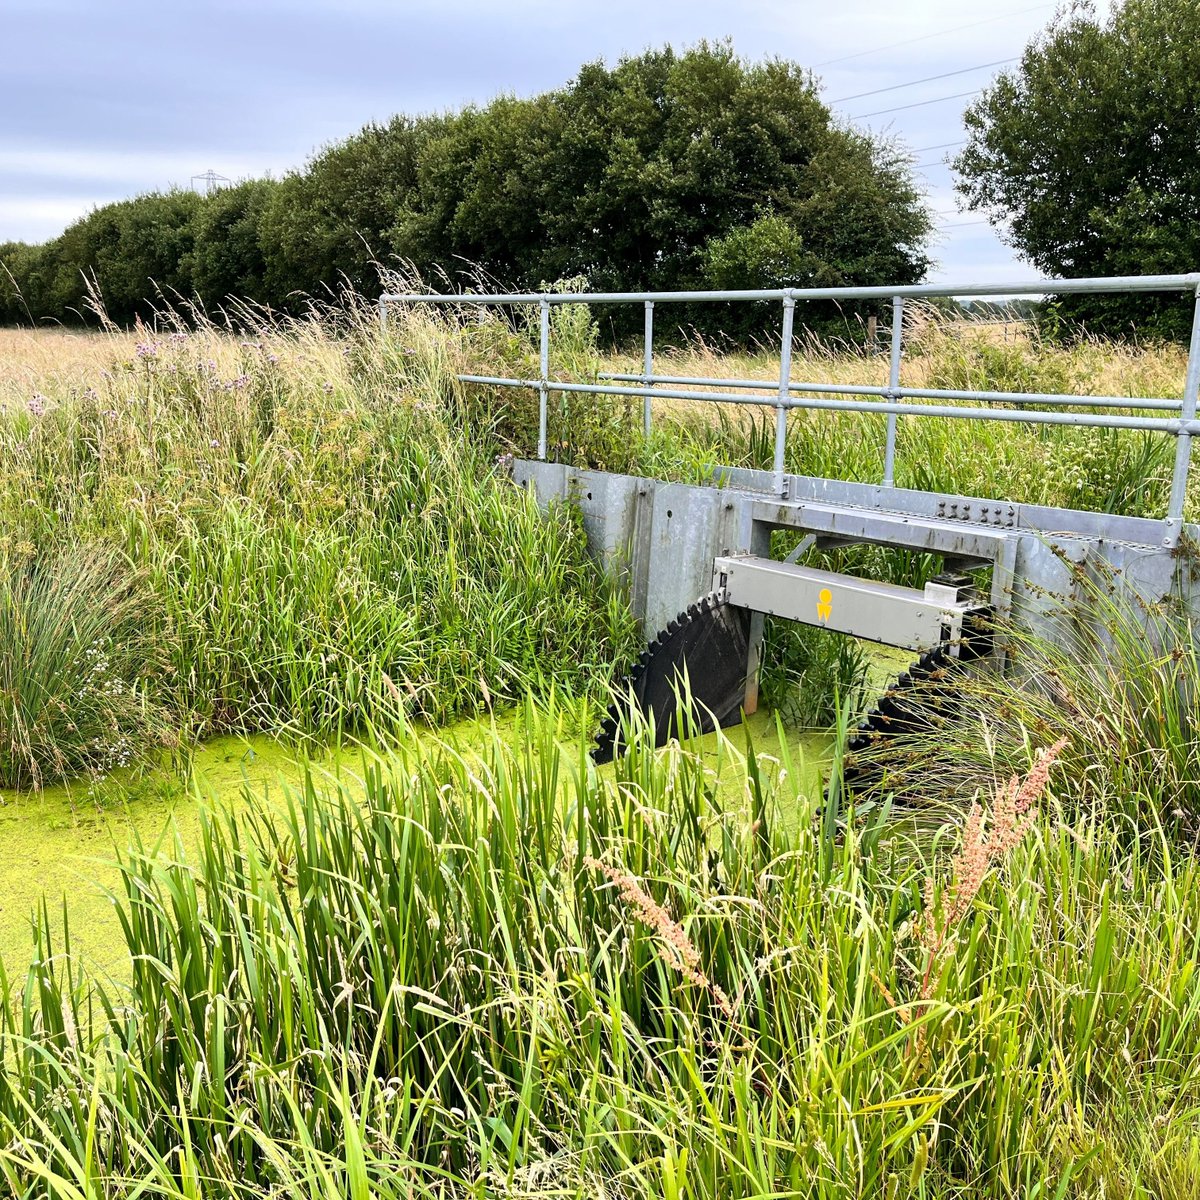 Calling all #InternalDrainageBoards (IDBs)! 📣

We’ve launched a £5m Lowland Agricultural Peat Small Infrastructure Pilot.

This will support IDBs to install infrastructure and tech that increases control of water levels to preserve lowland #peat.

Apply: find-government-grants.service.gov.uk/grants/ncf-low…